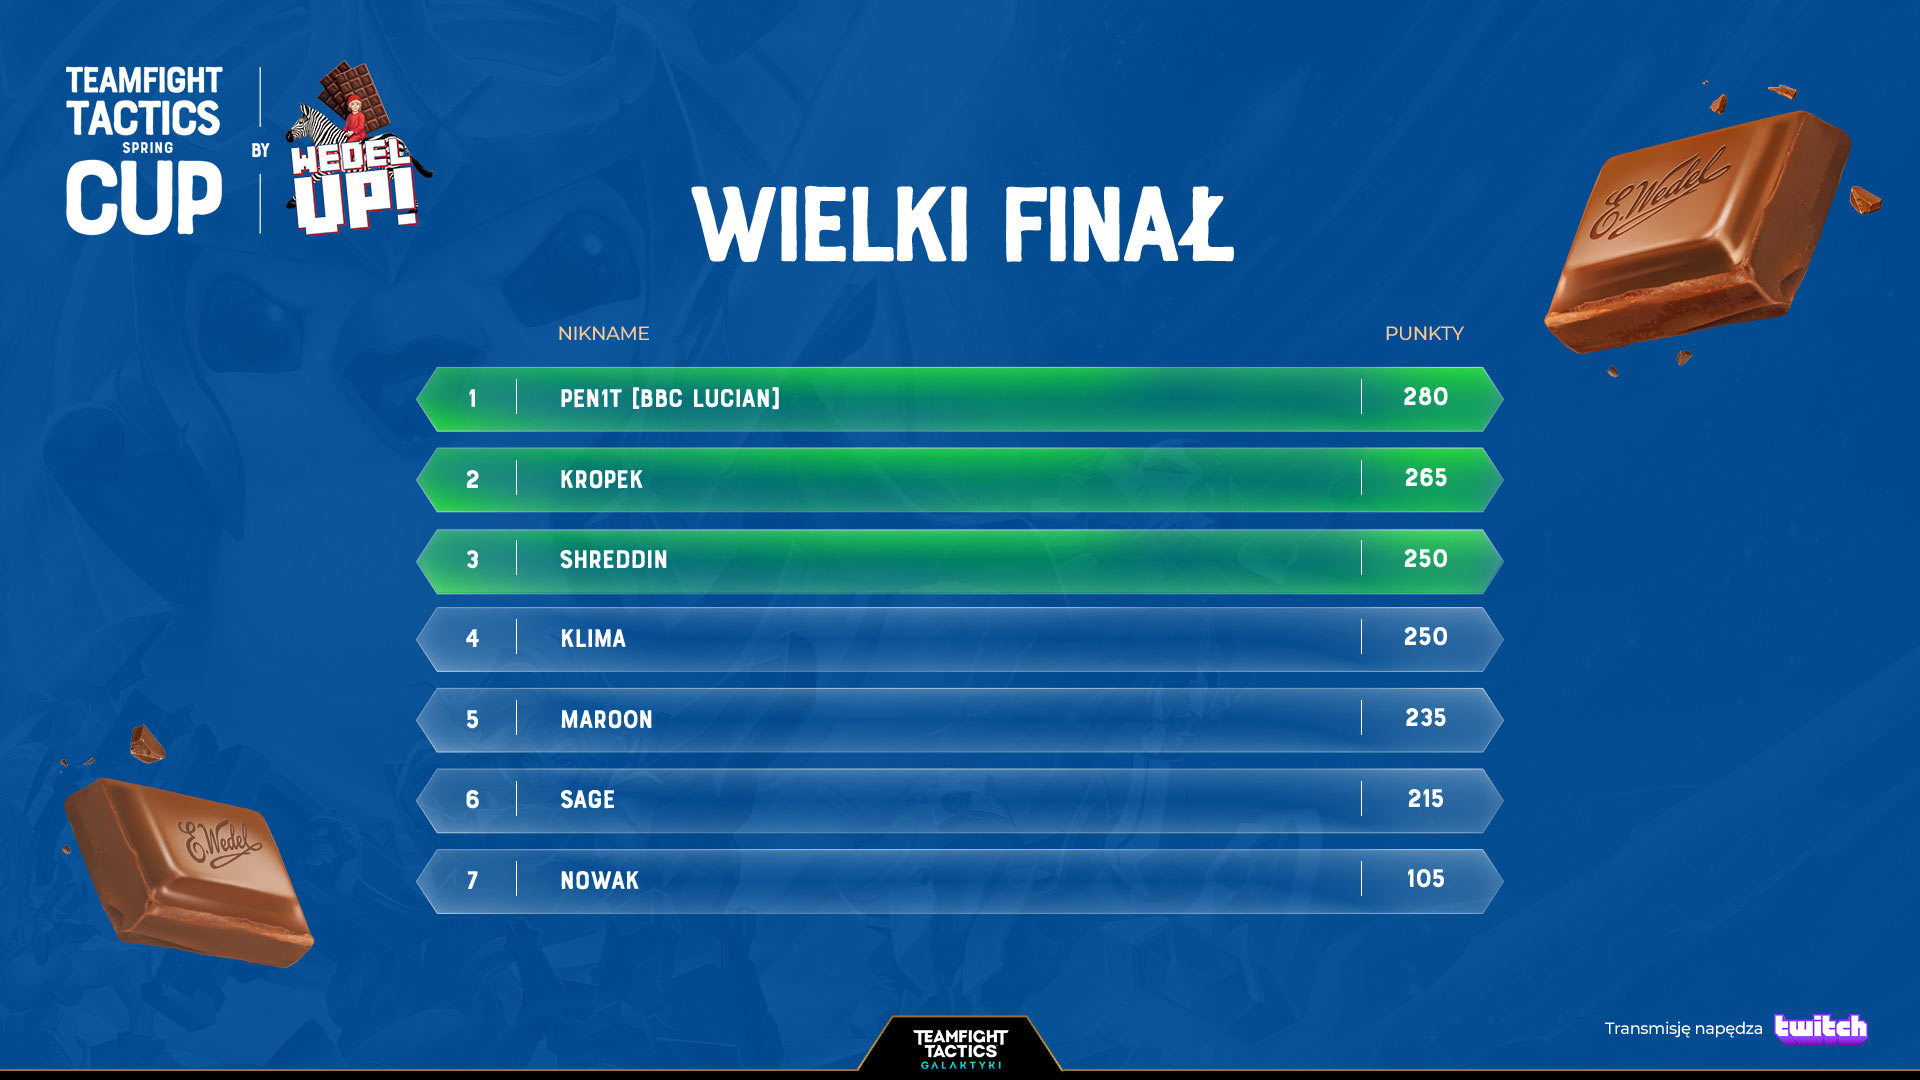 Wielki Fina� Teamfight Tactics Spring CUP by Wedel Up!